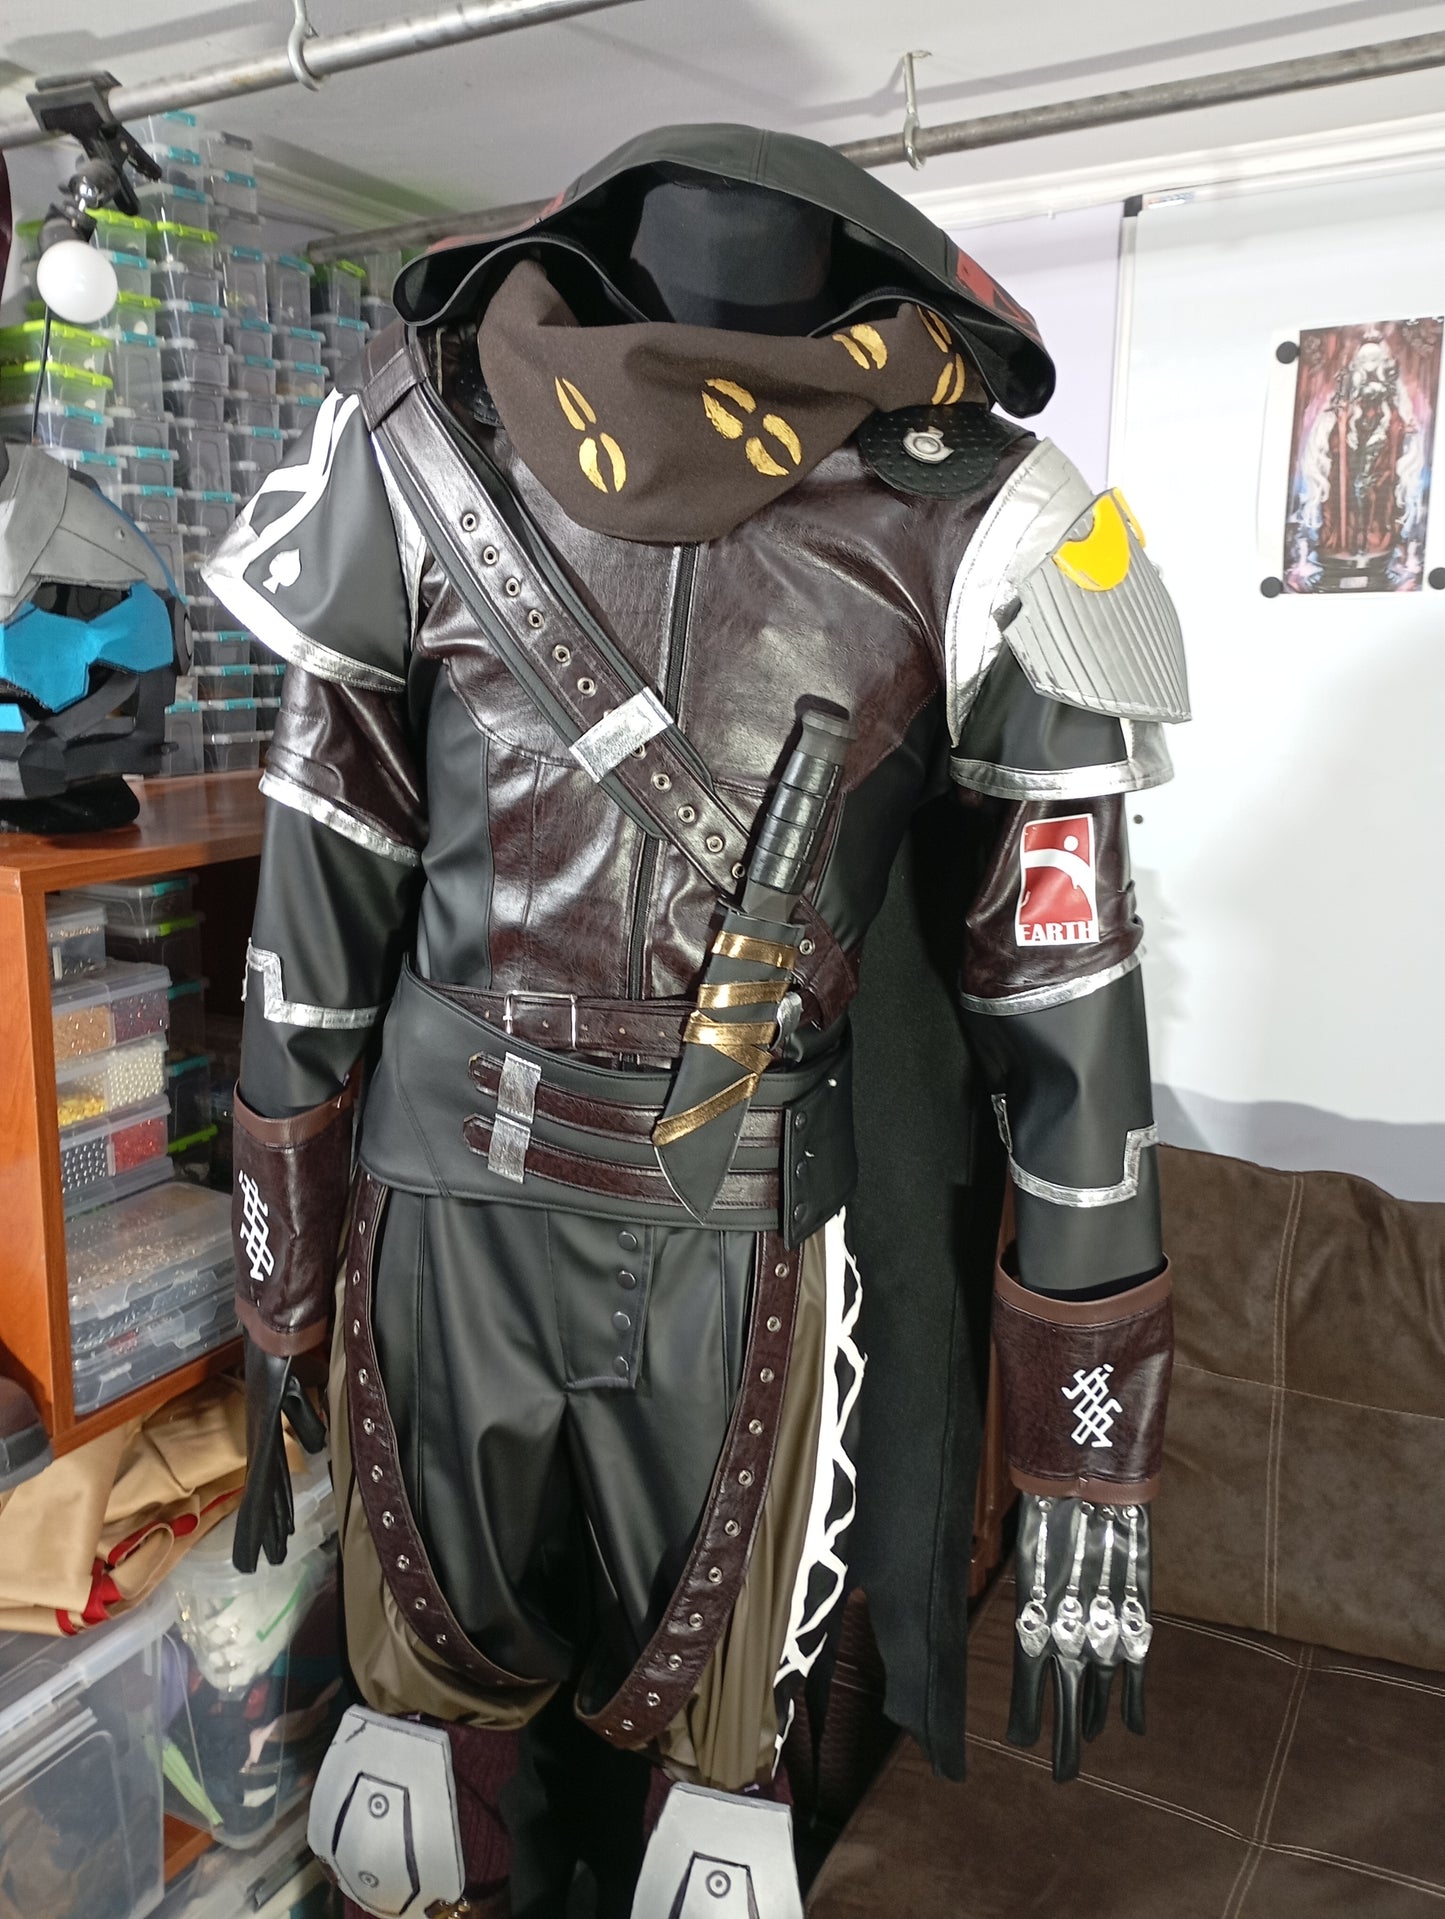 Cayde-6 from Destiny (game version)